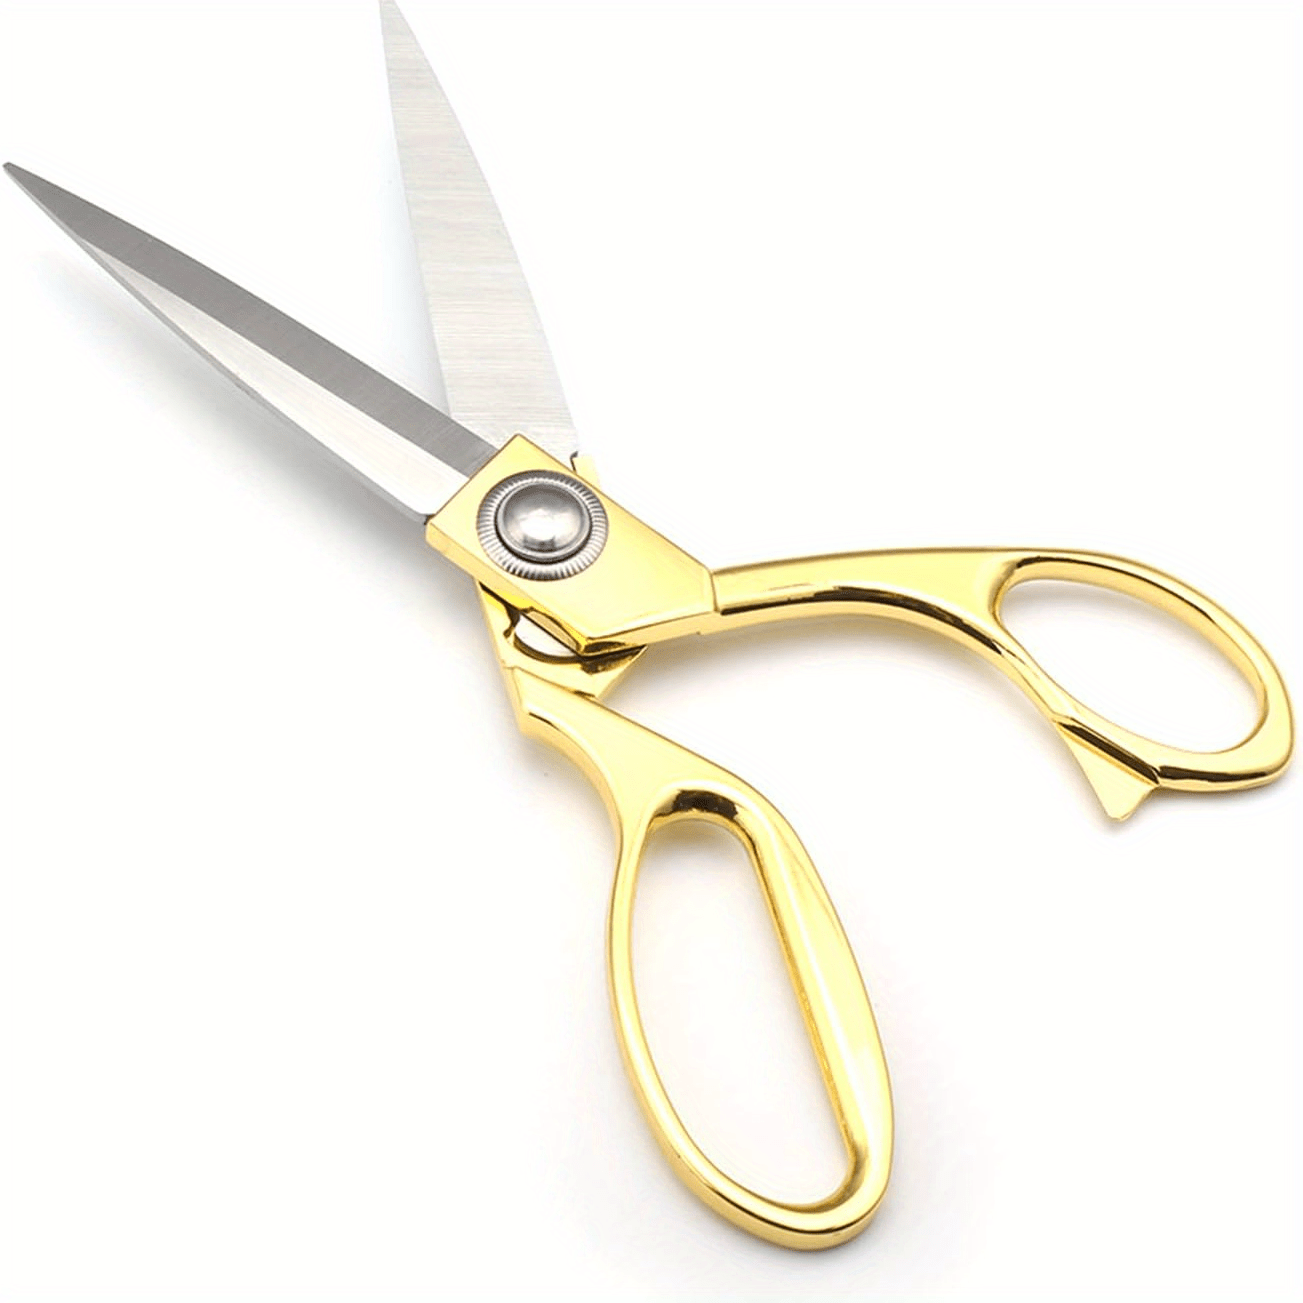 manganese steel sewing scissors for fabric